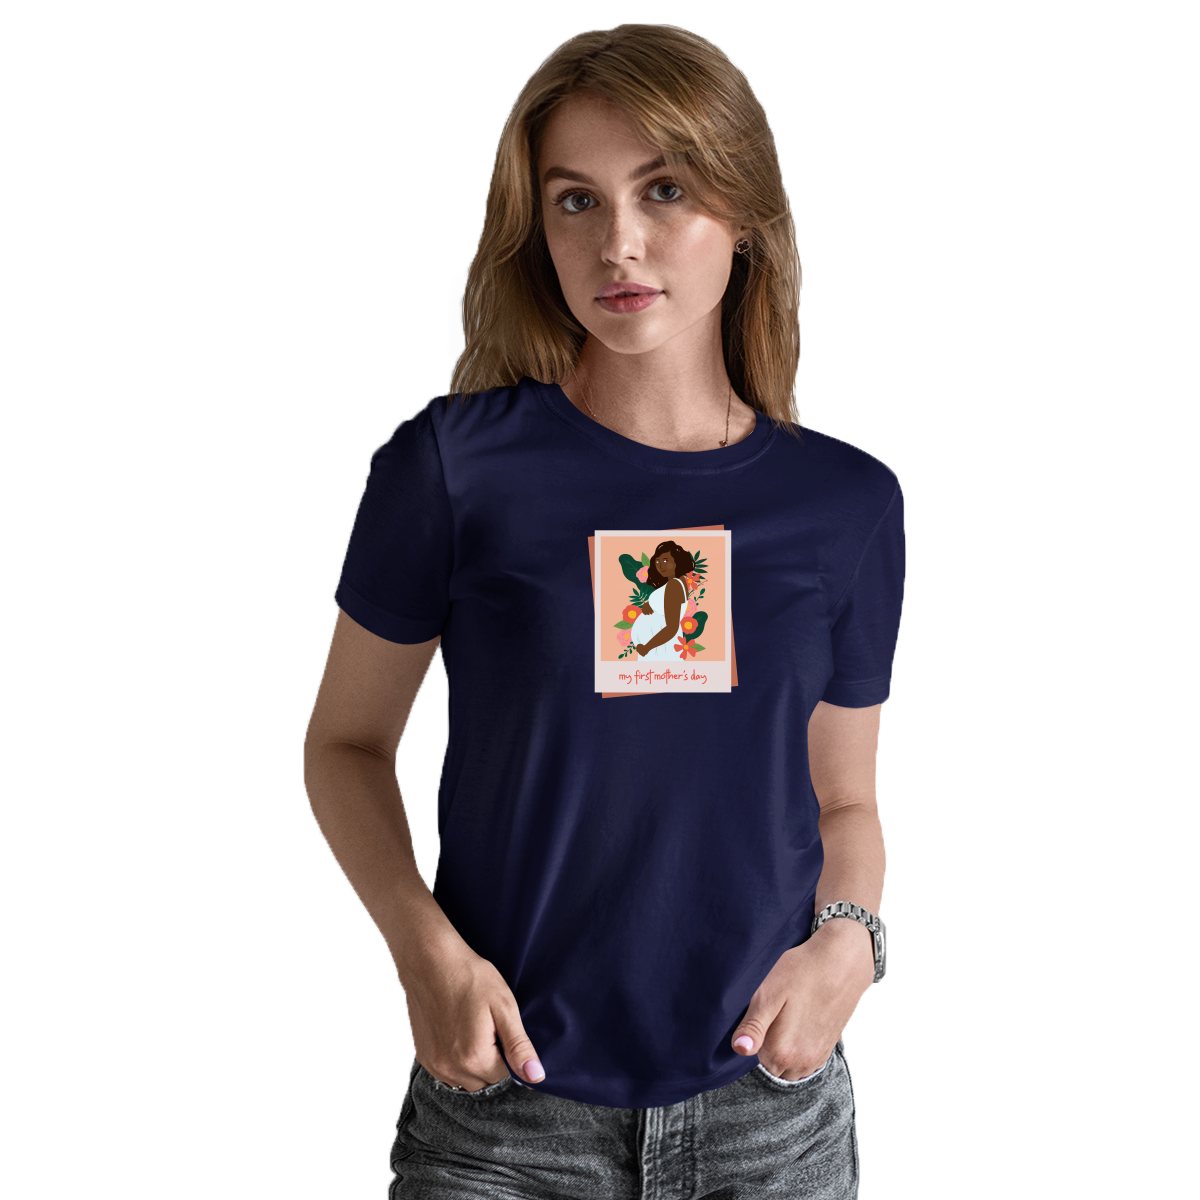 My First Mother's day Women's T-shirt | Navy